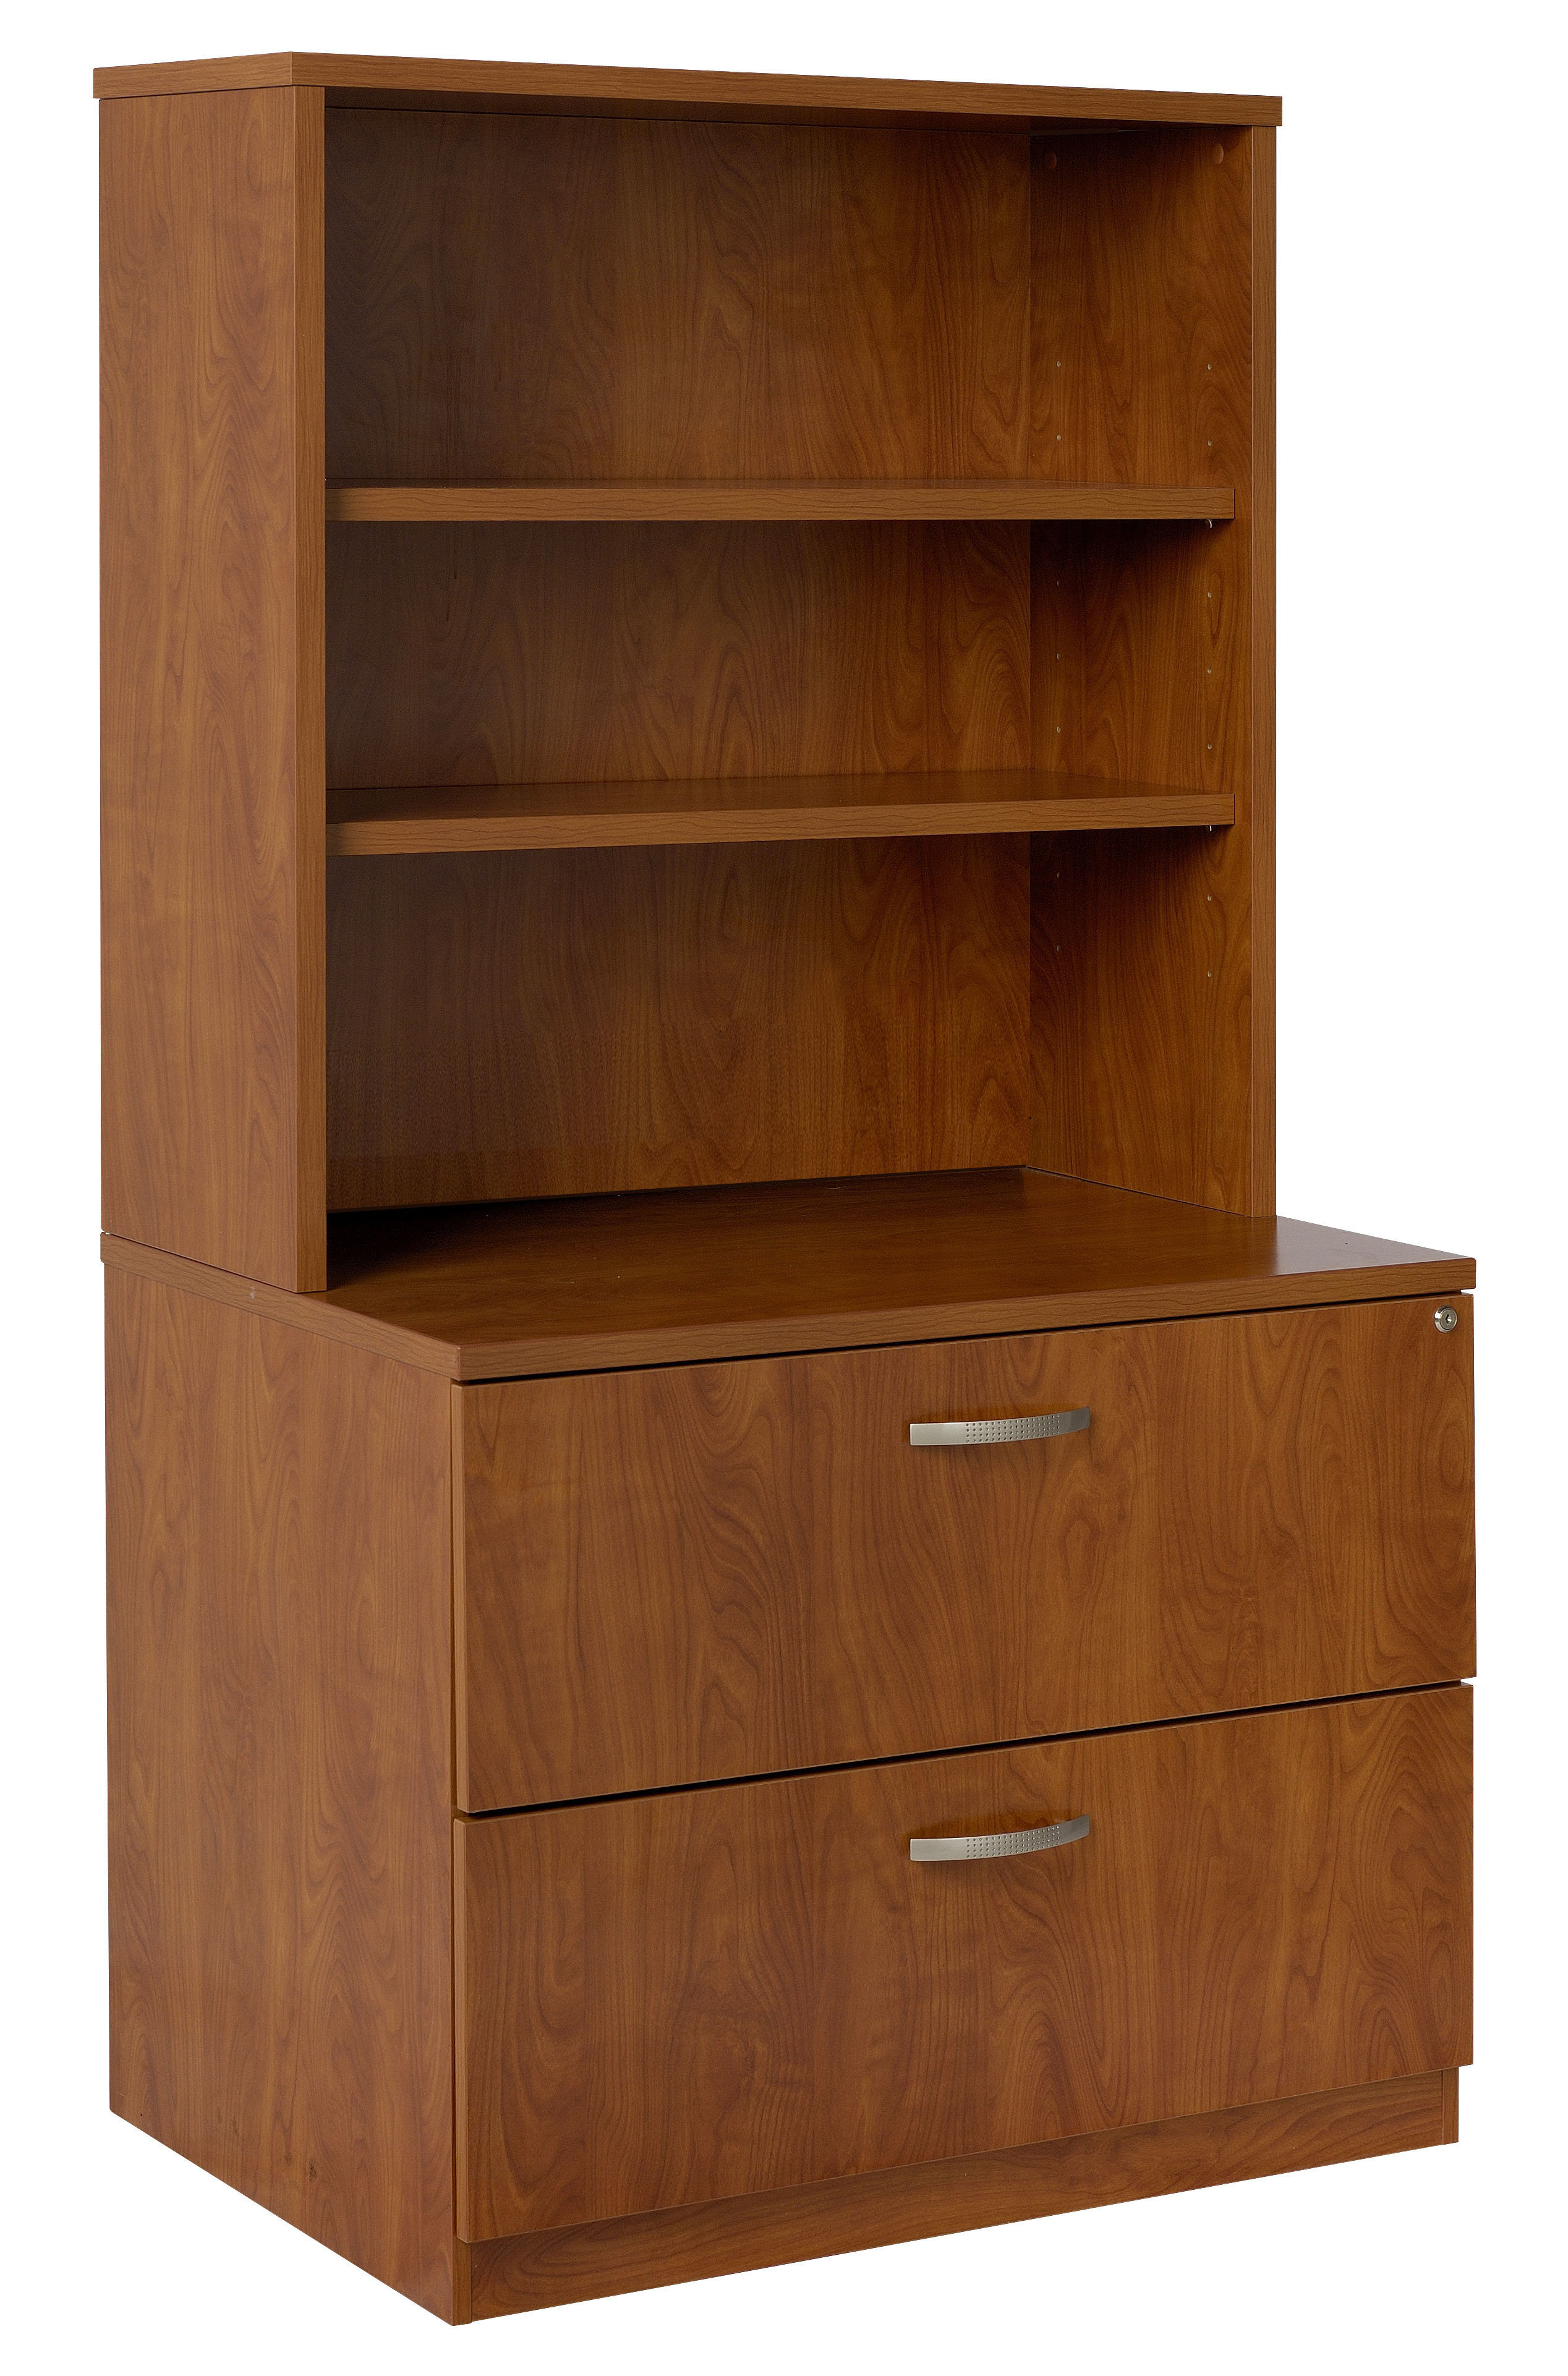 Trendway Lateral File Hutch 2 Drawer Vertical Filing Cabinet Wayfair within size 2536 X 3842